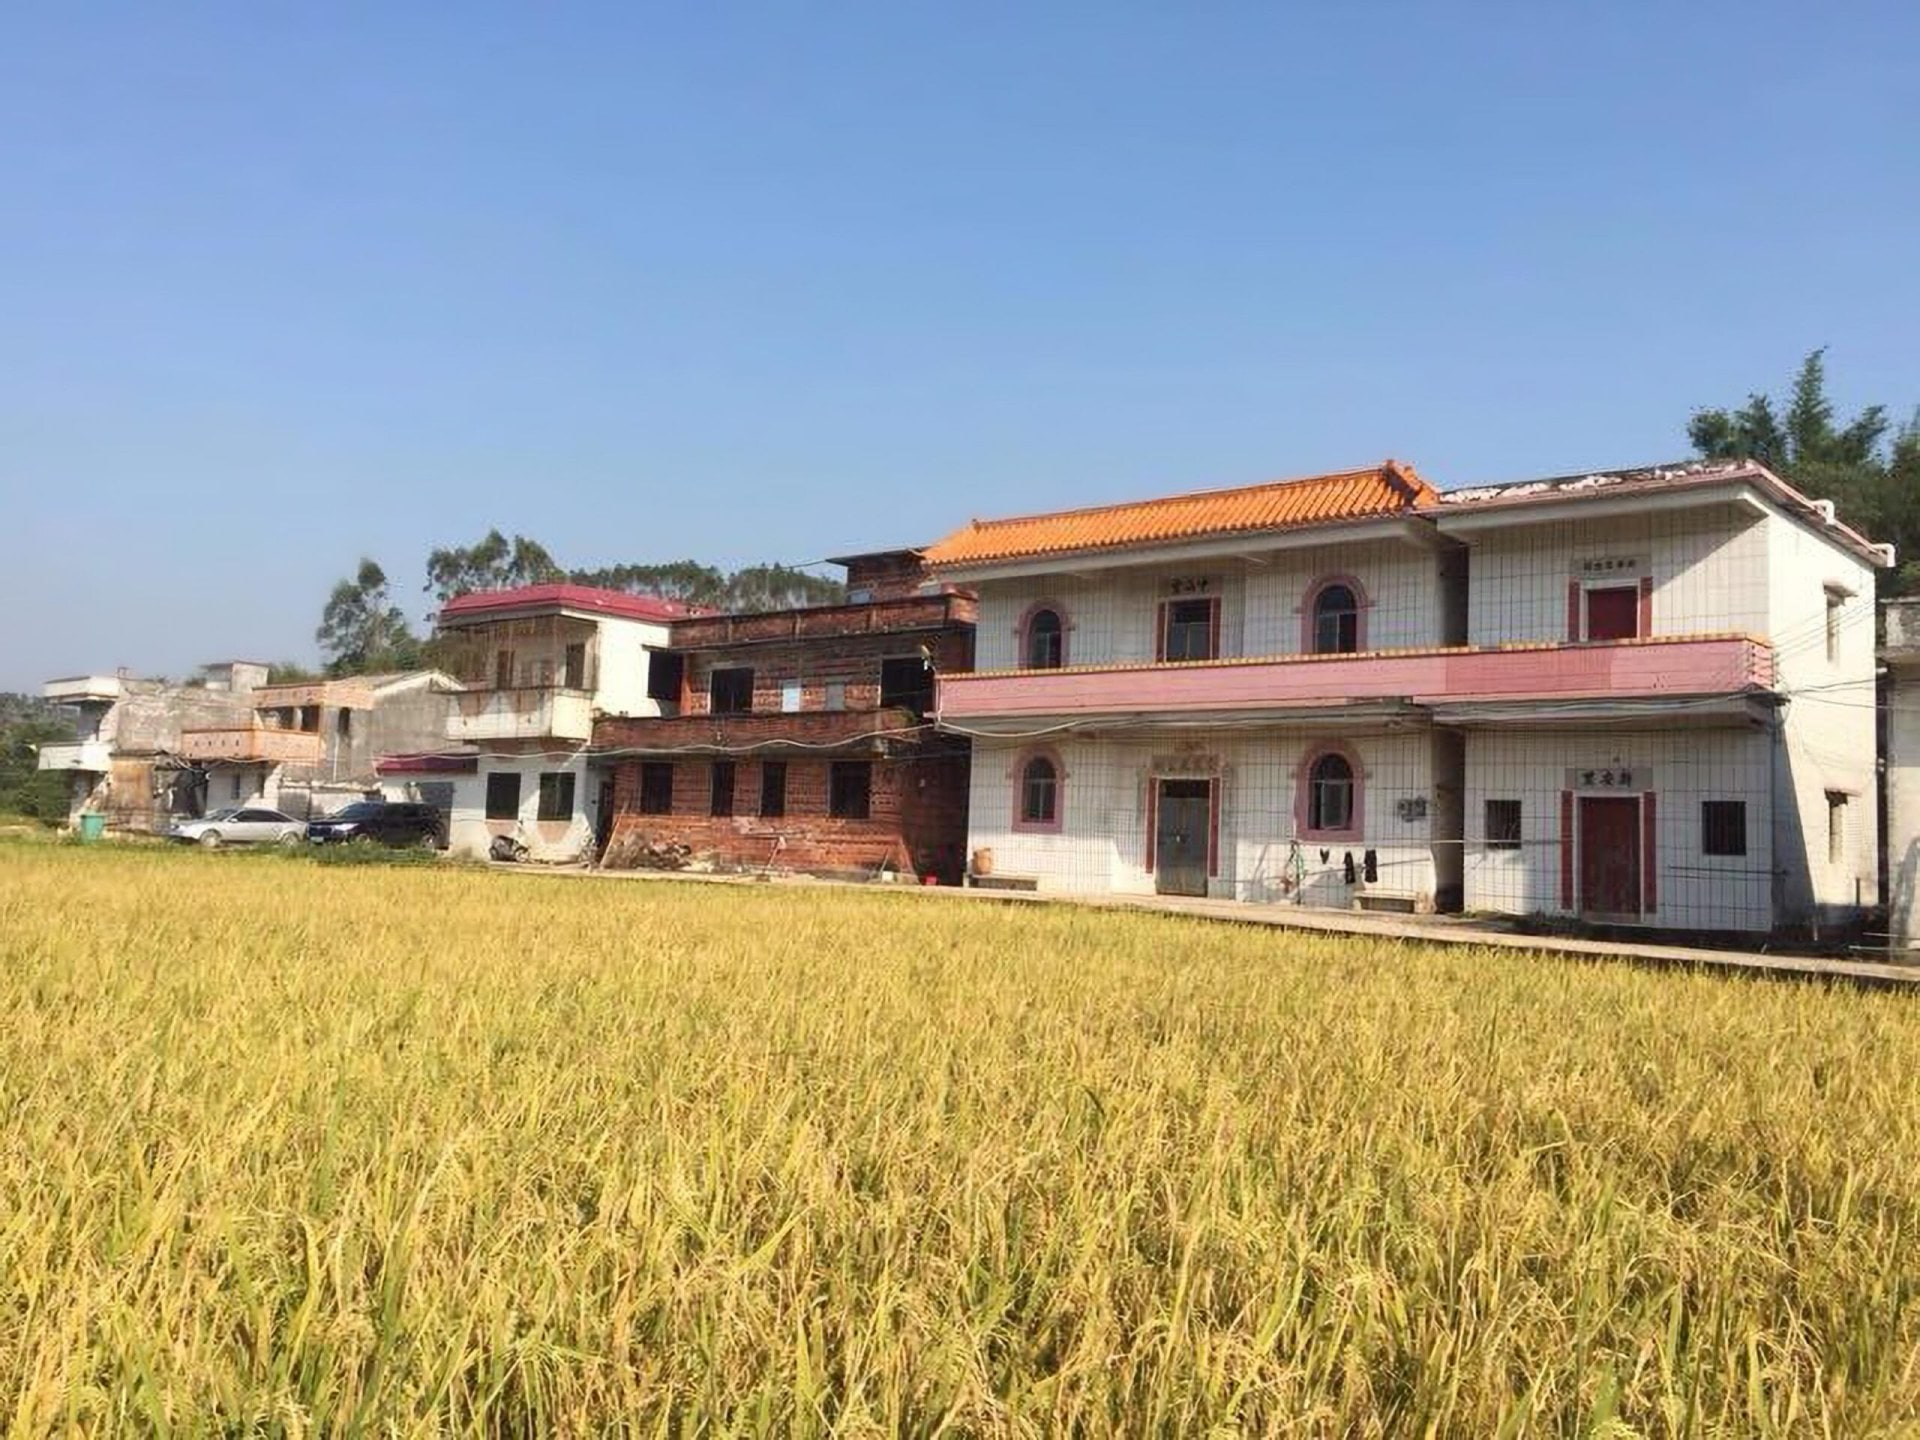 A house and rice field in China